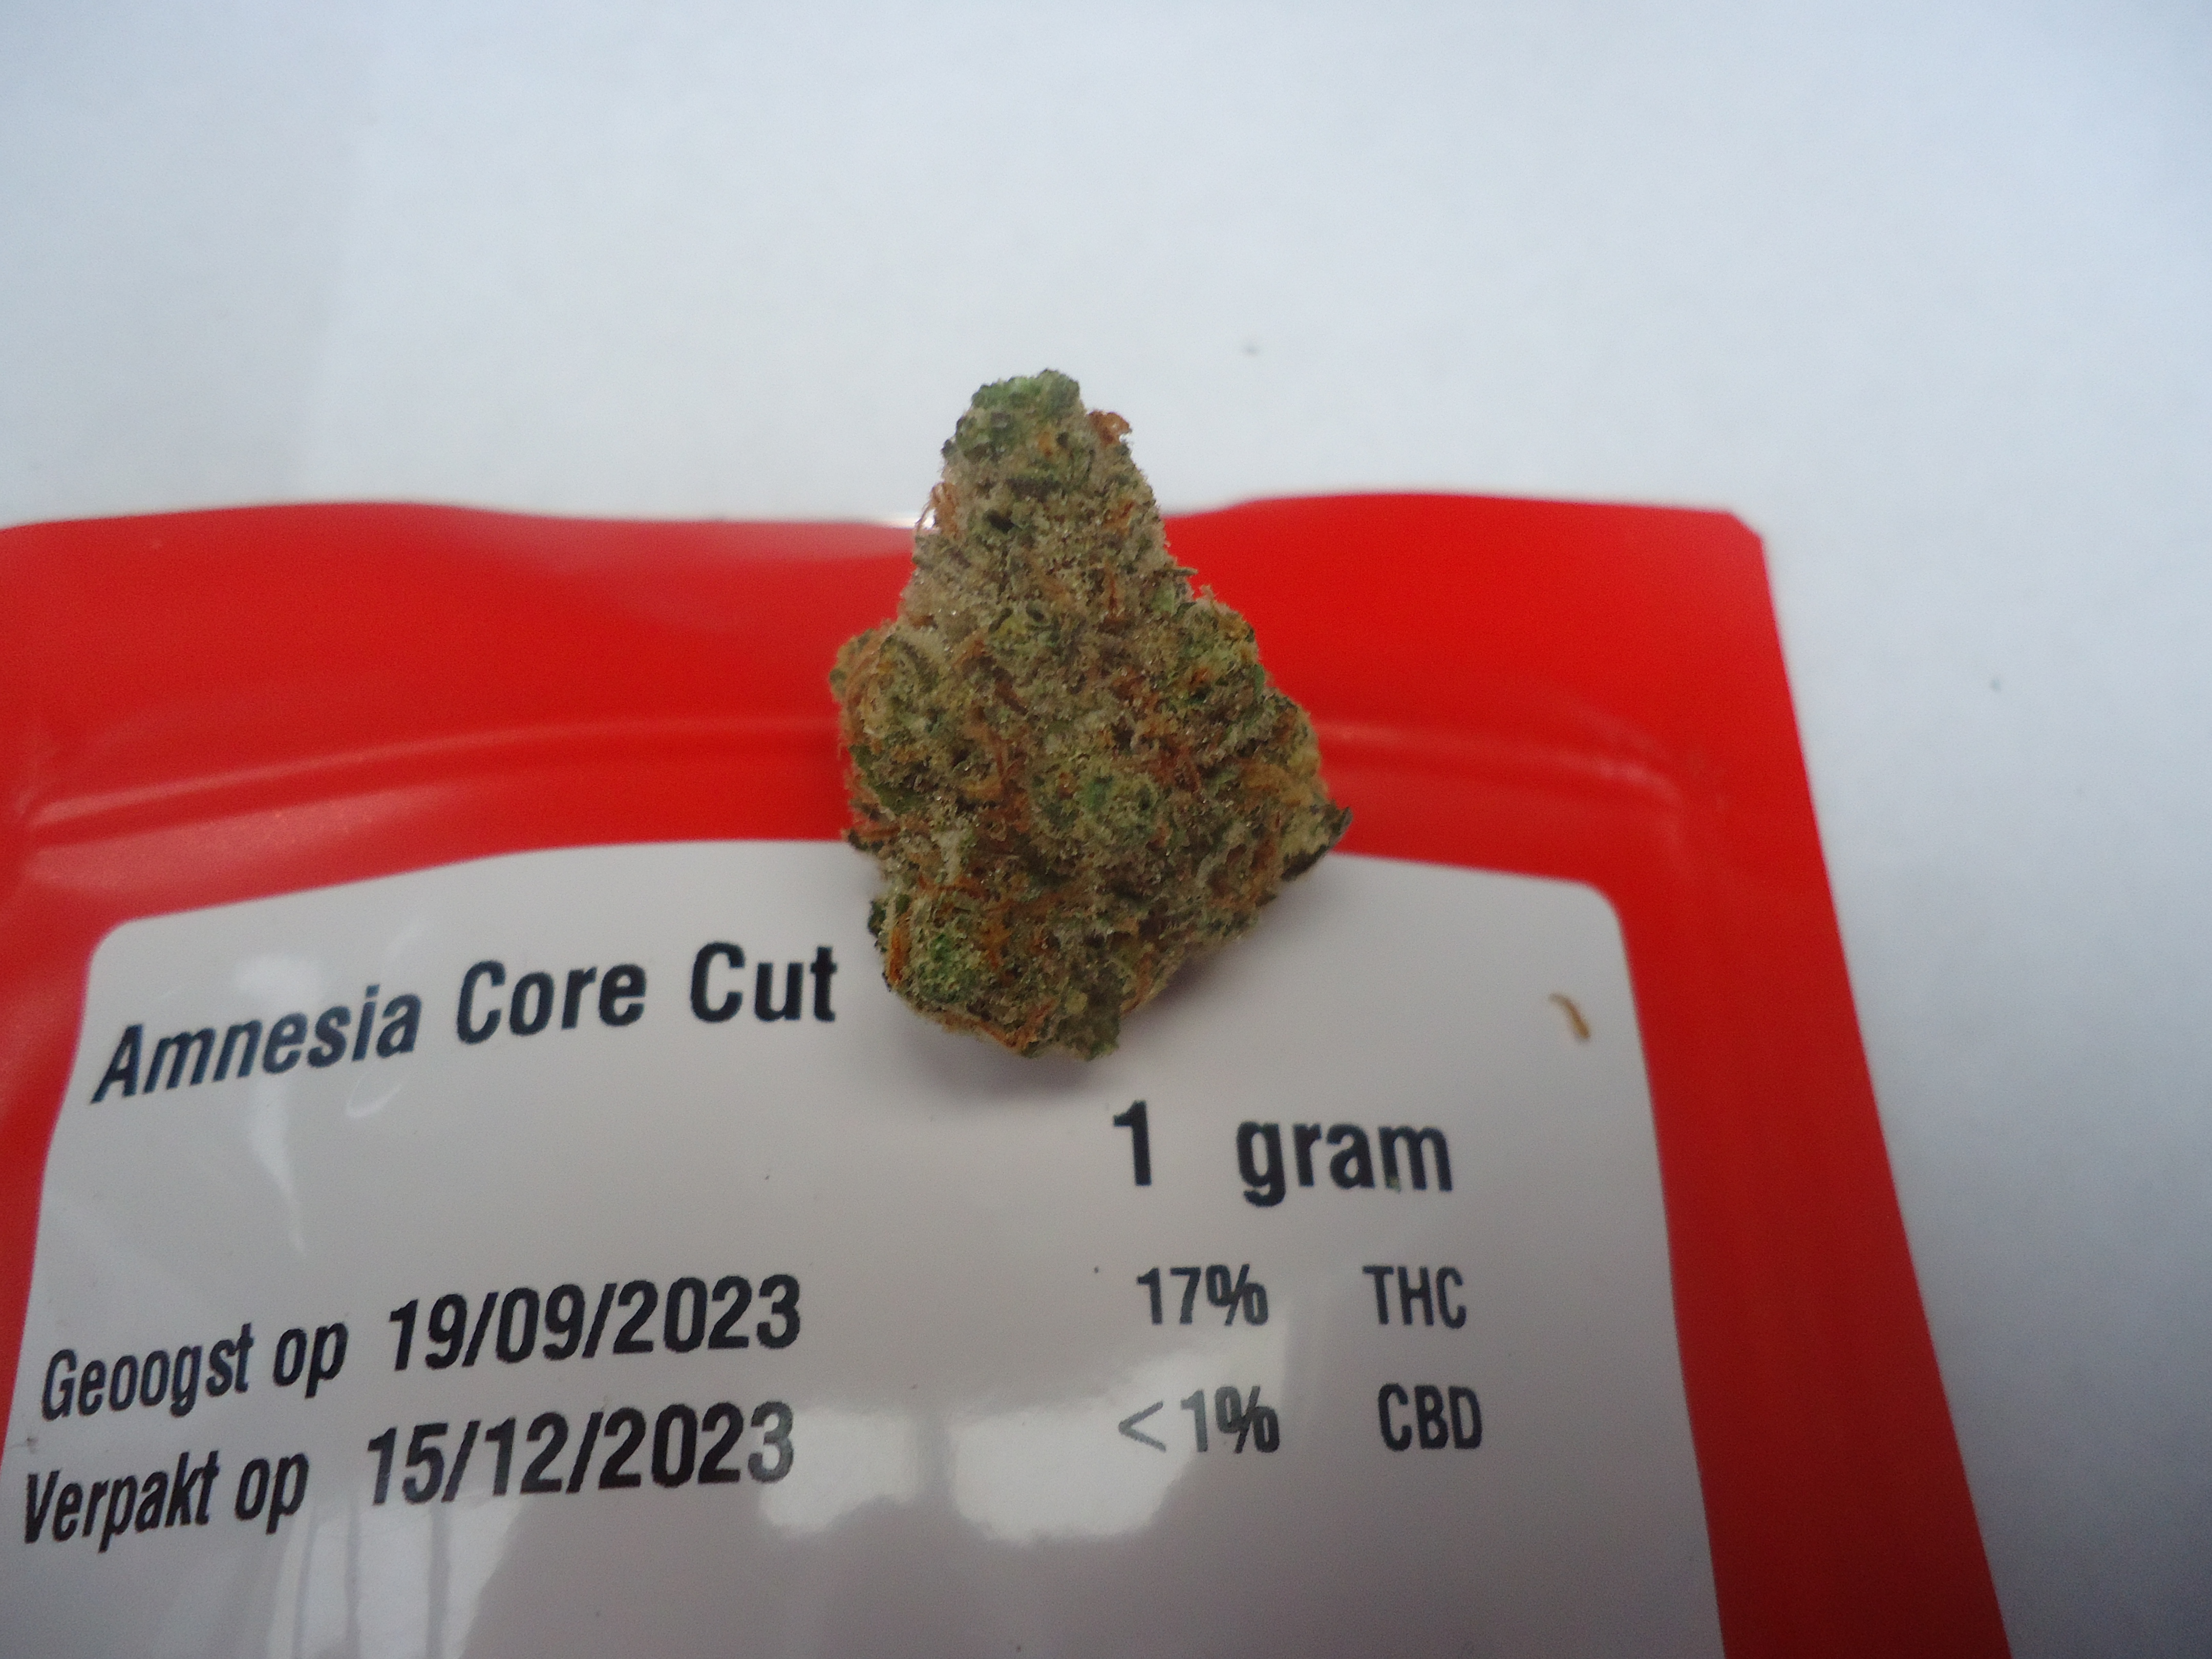 8 Legal Amnesia Core Cut From Fyta From Coffeeshops.December.2023.JPG